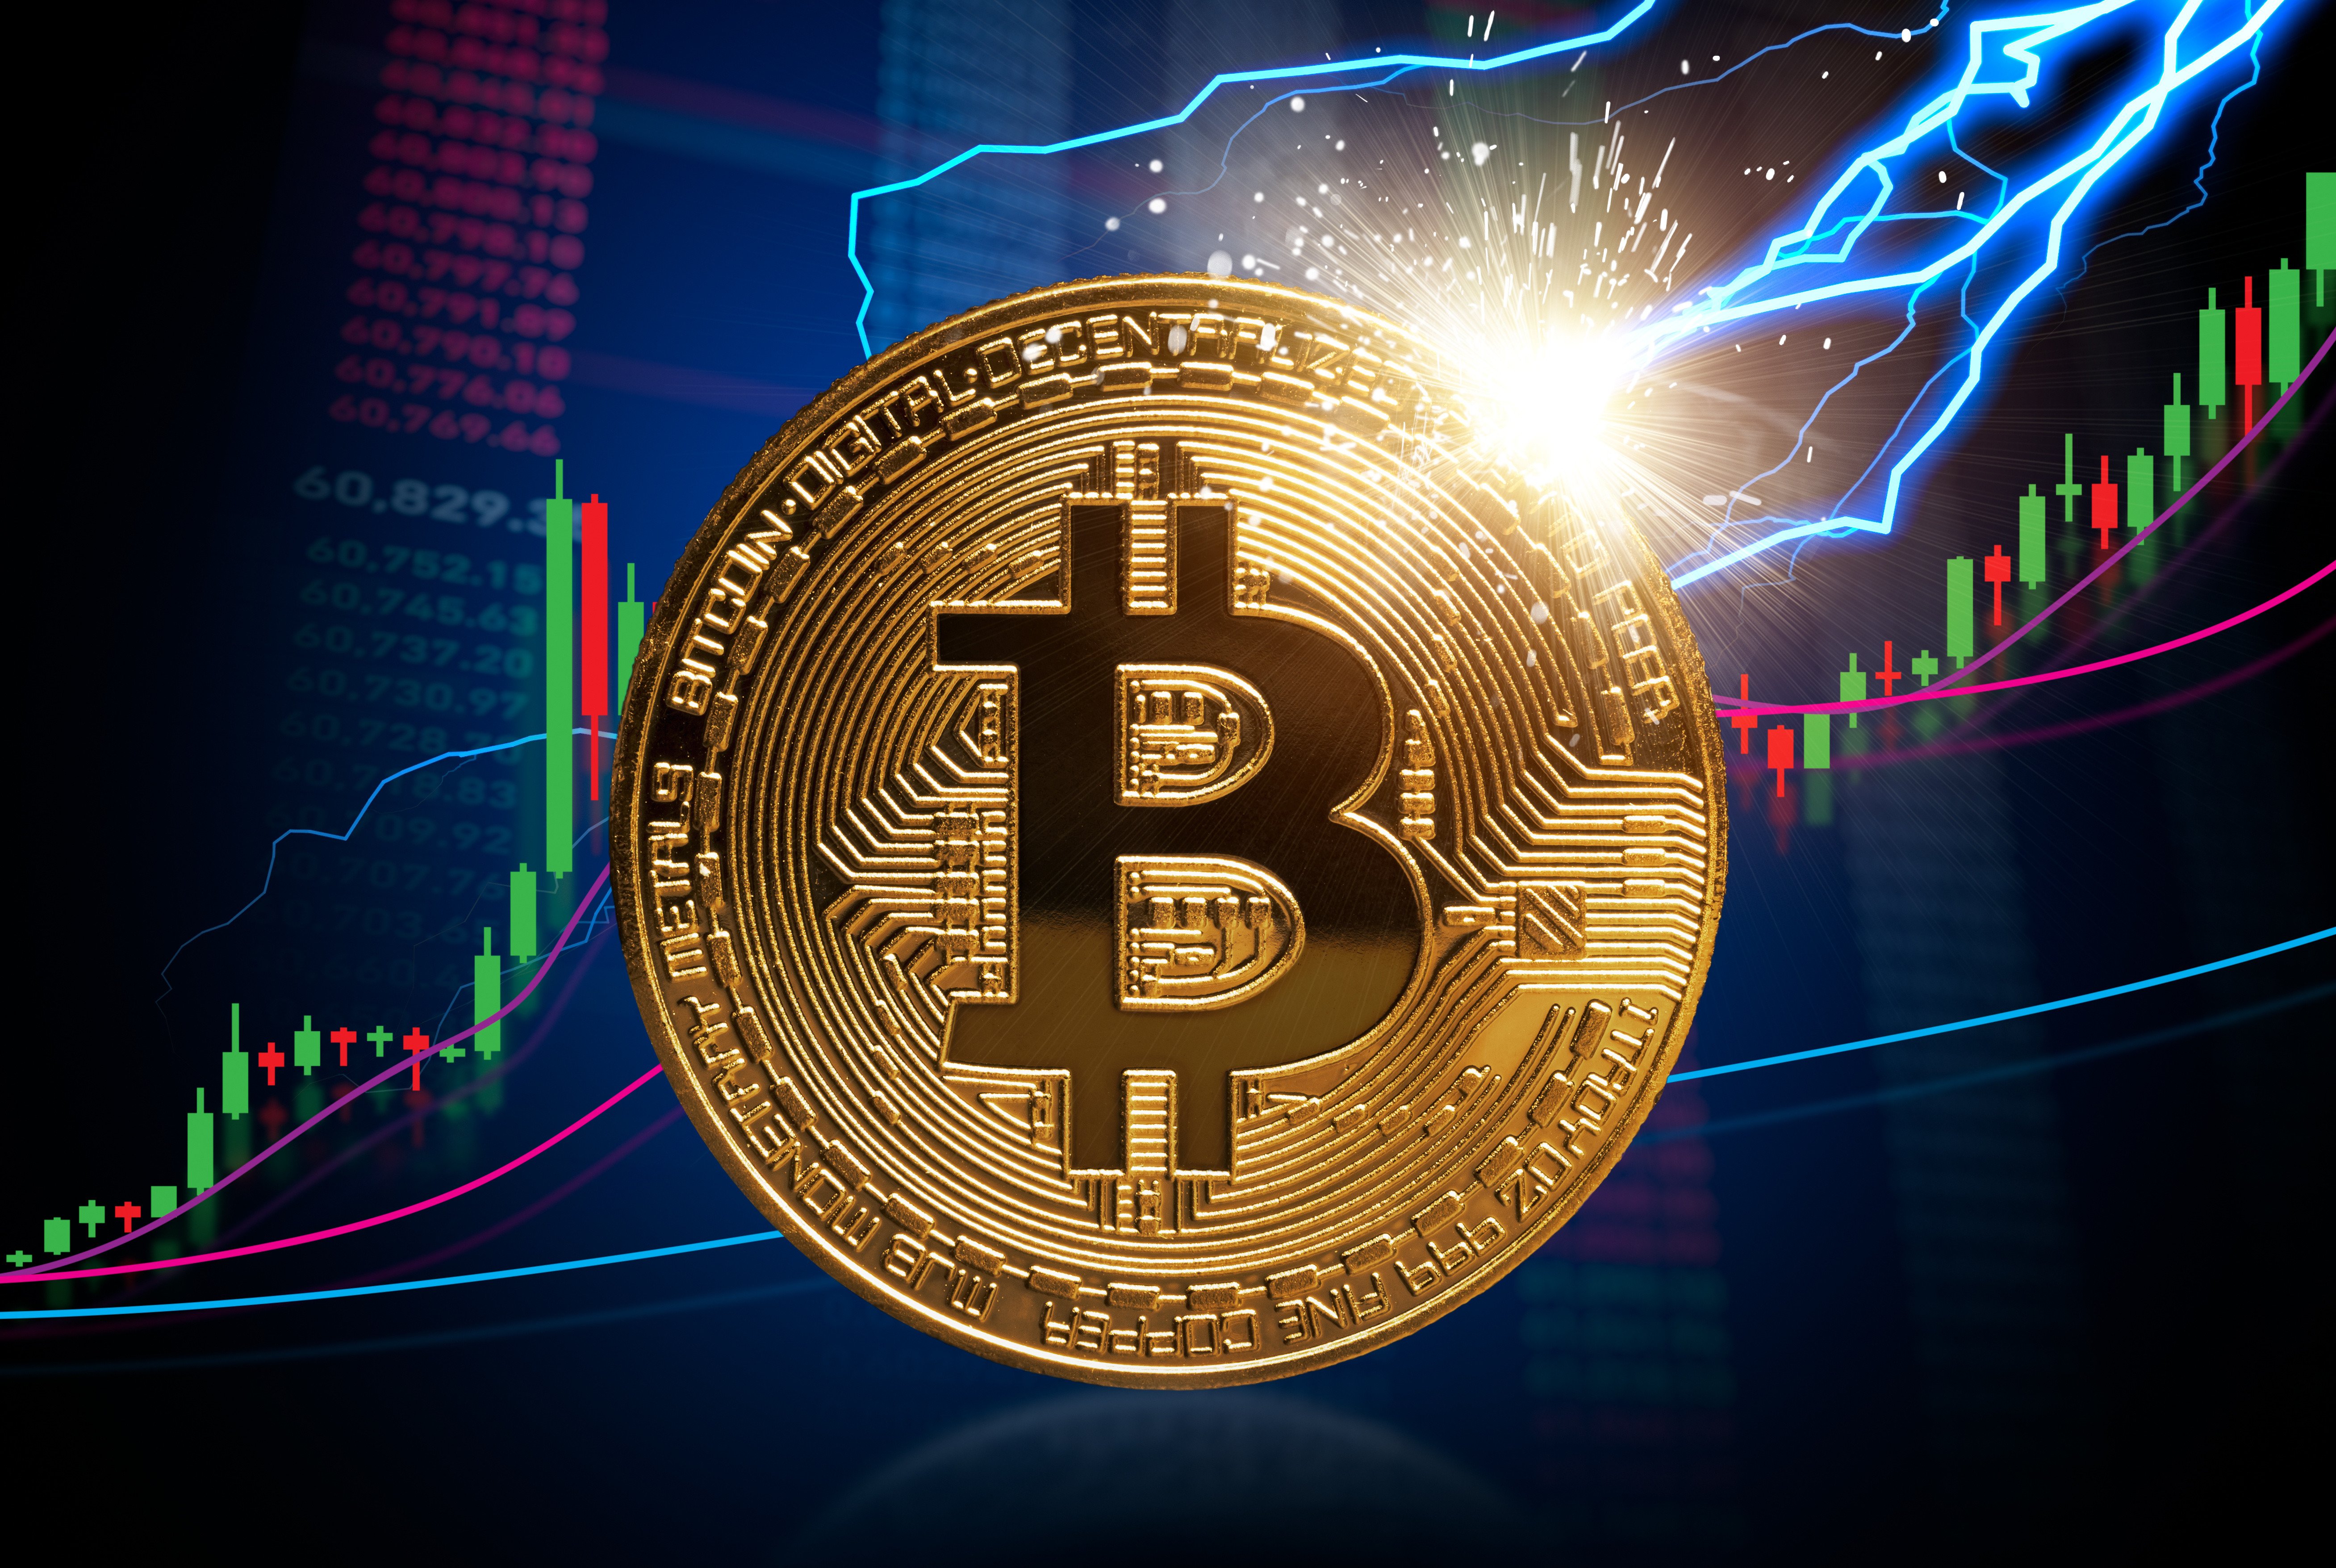 Bitcoin Dominance Reaches Over 49%, Highest in 2 Years – What’s Going On?